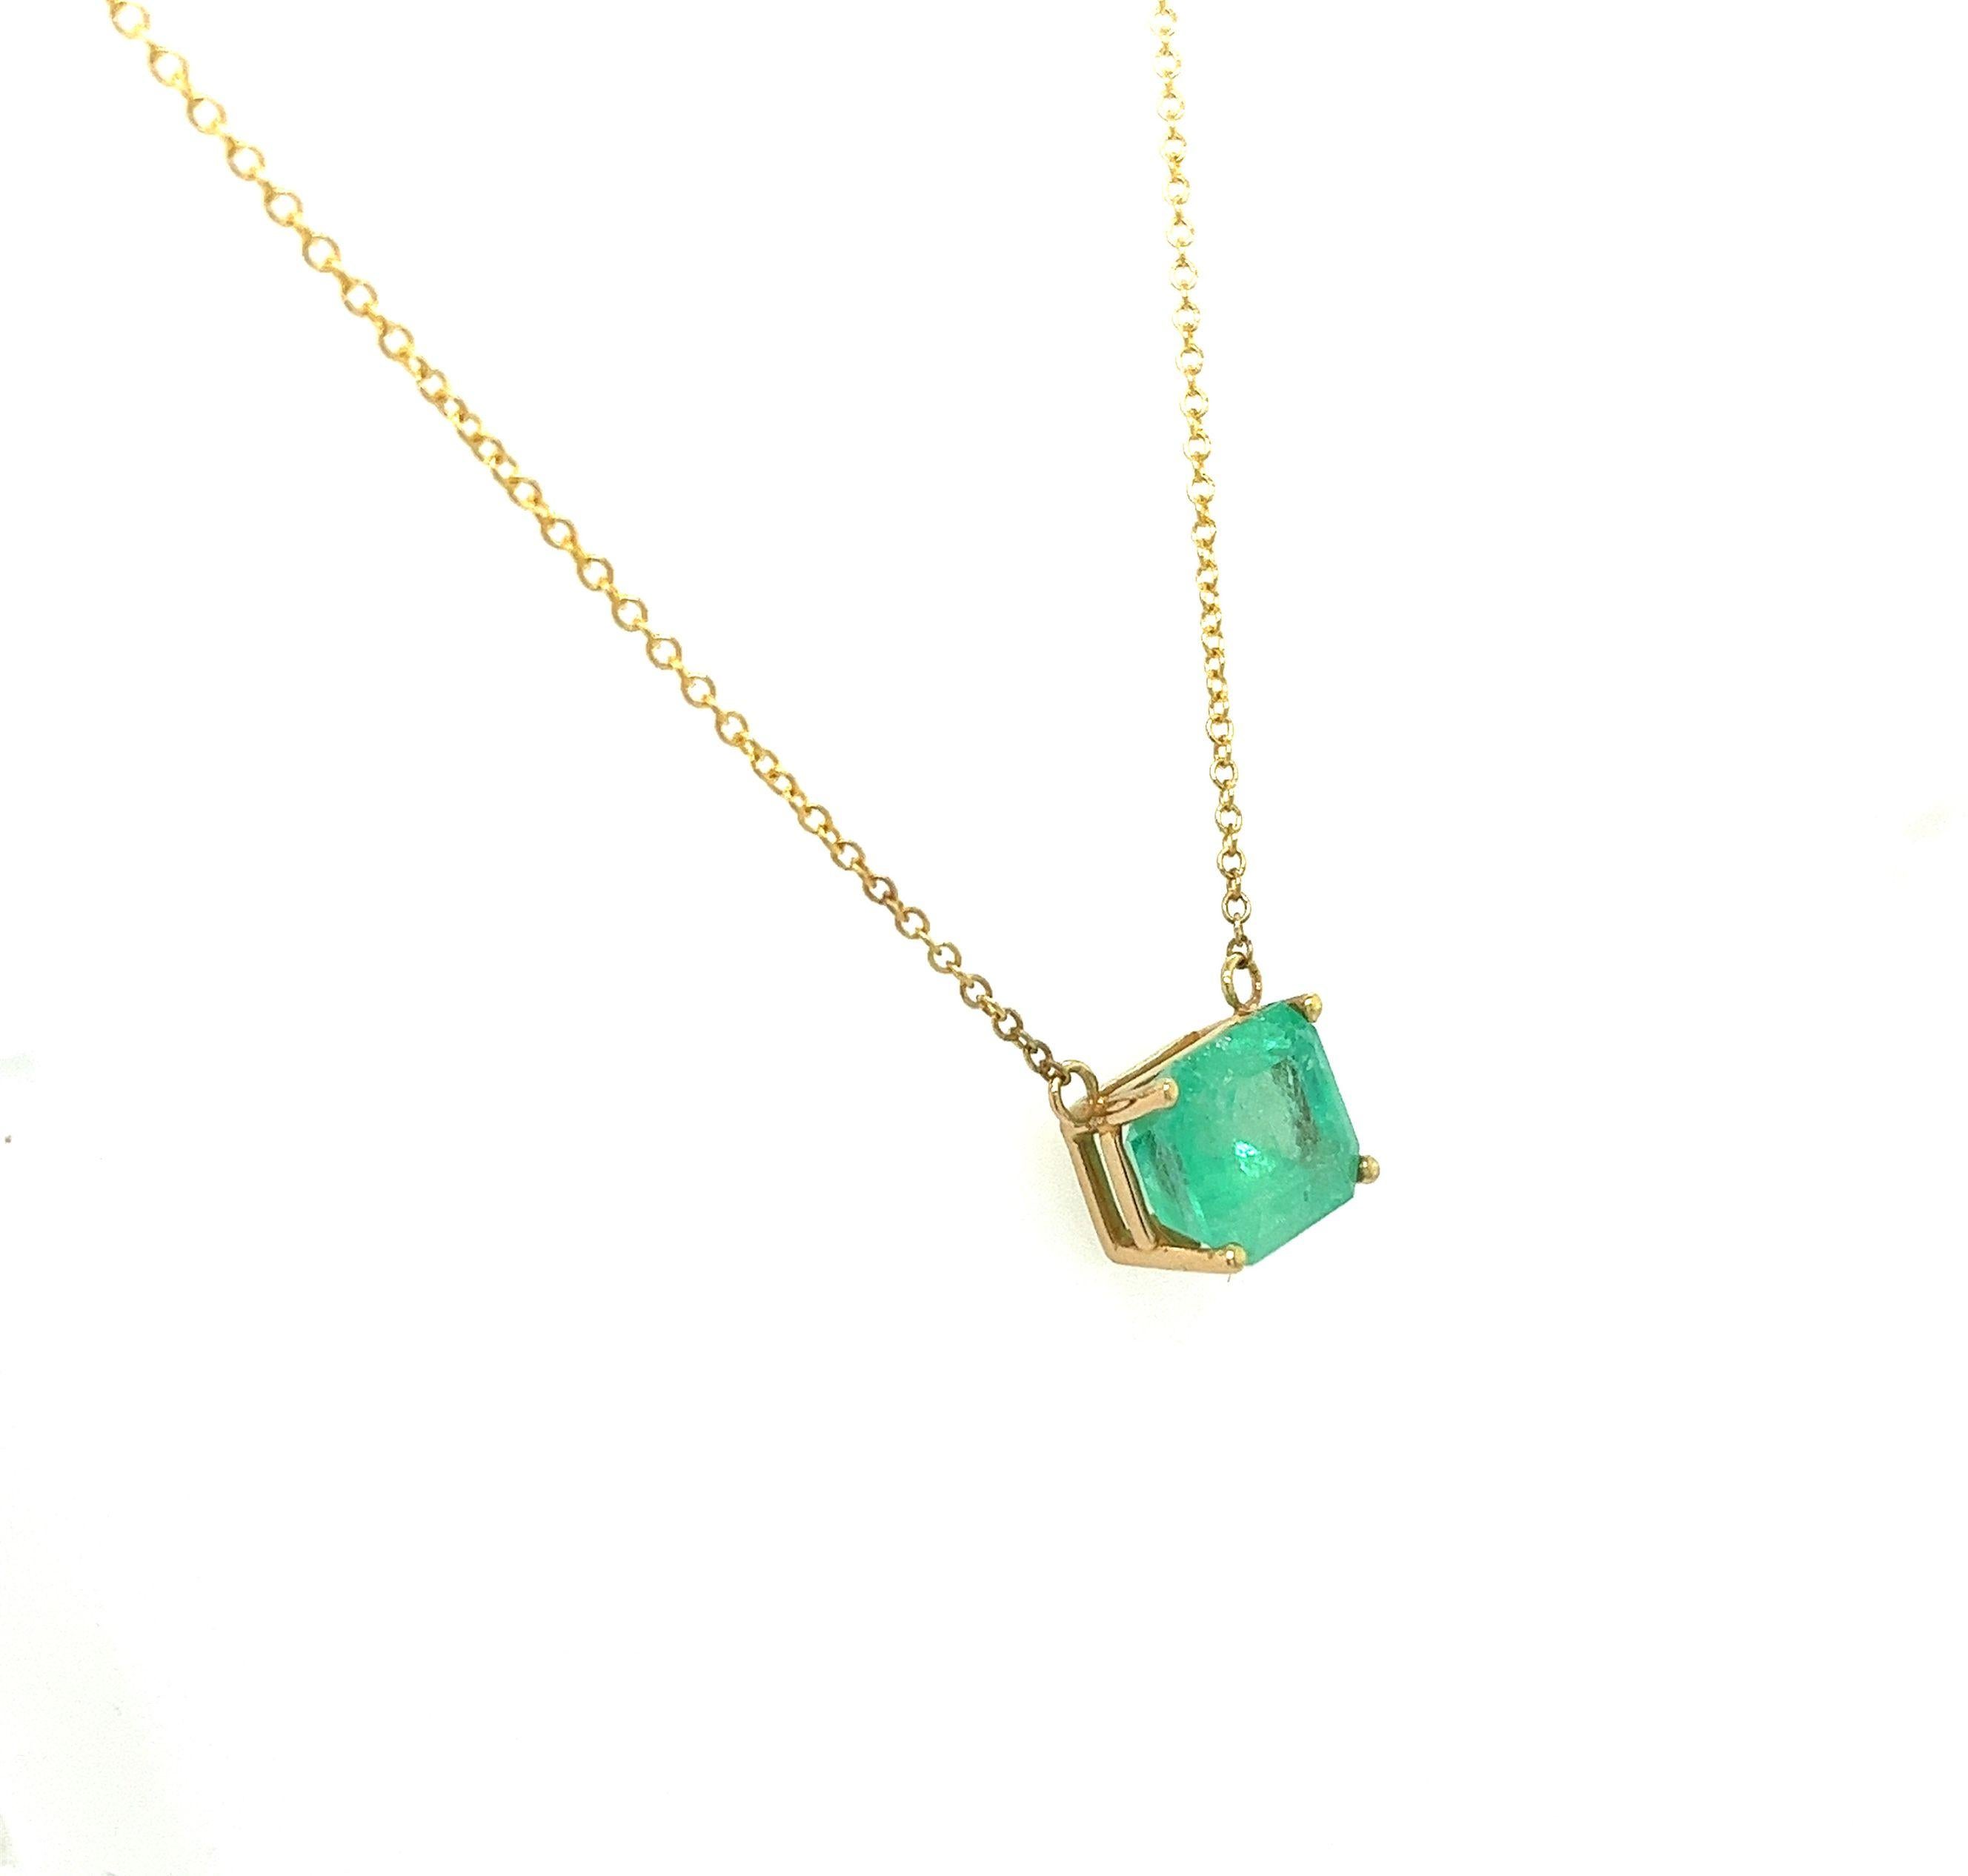 Women's 3.6 Carat Colombian Emerald Solitaire East West Pendant Necklace in 14K Gold For Sale